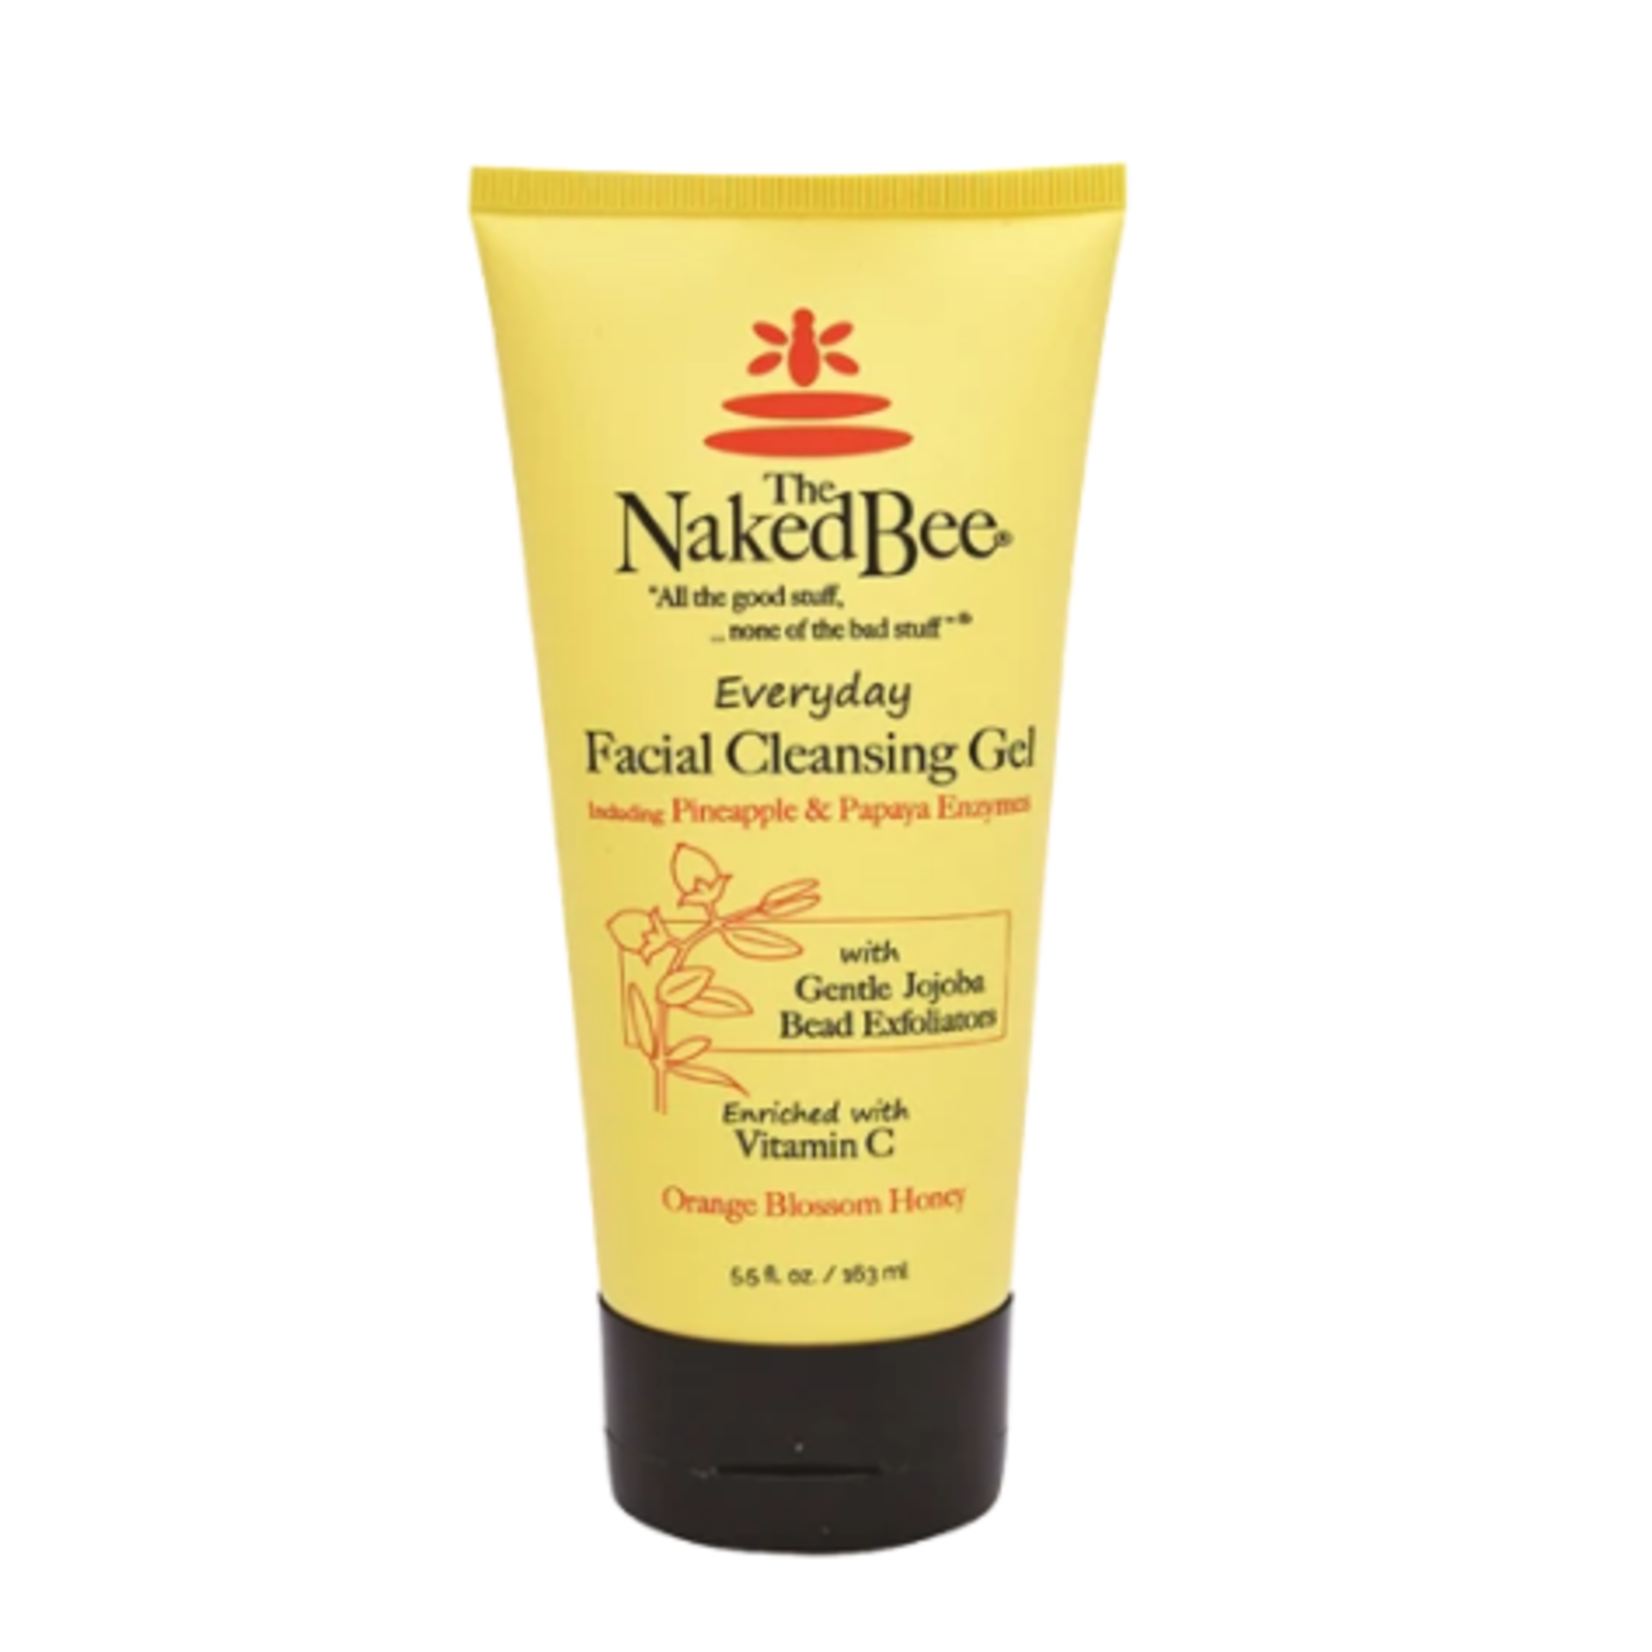 The Naked Bee The Naked Bee Everyday Facial Cleansing Gel 5.5oz